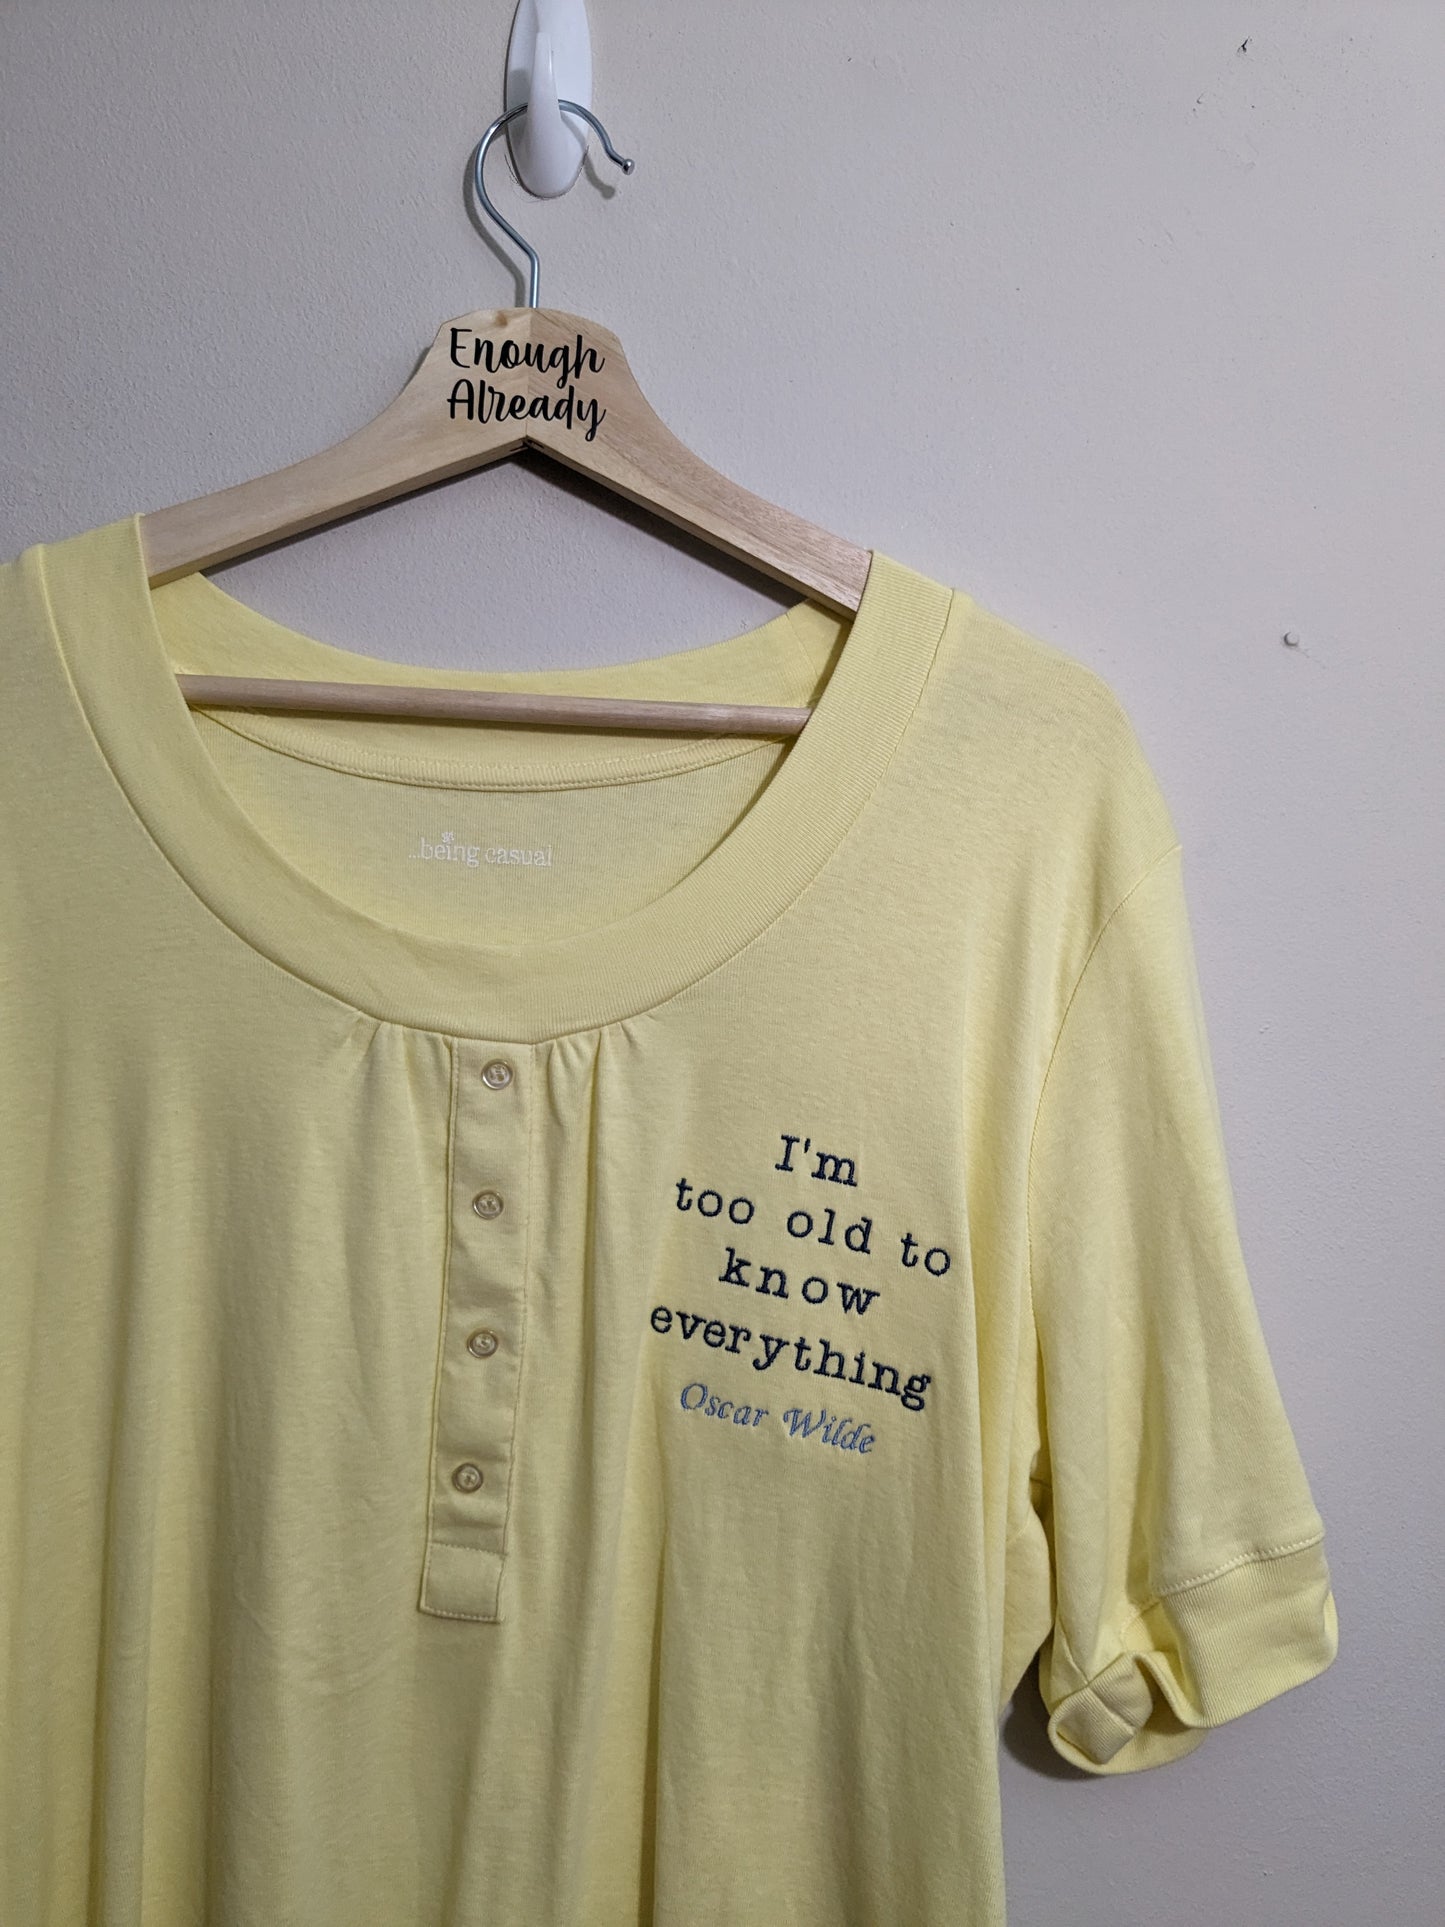 Size 20/22 Reworked Loungewear Set - Lemon Yellow & Navy - Embroidered Oscar Wilde Bookish Quote